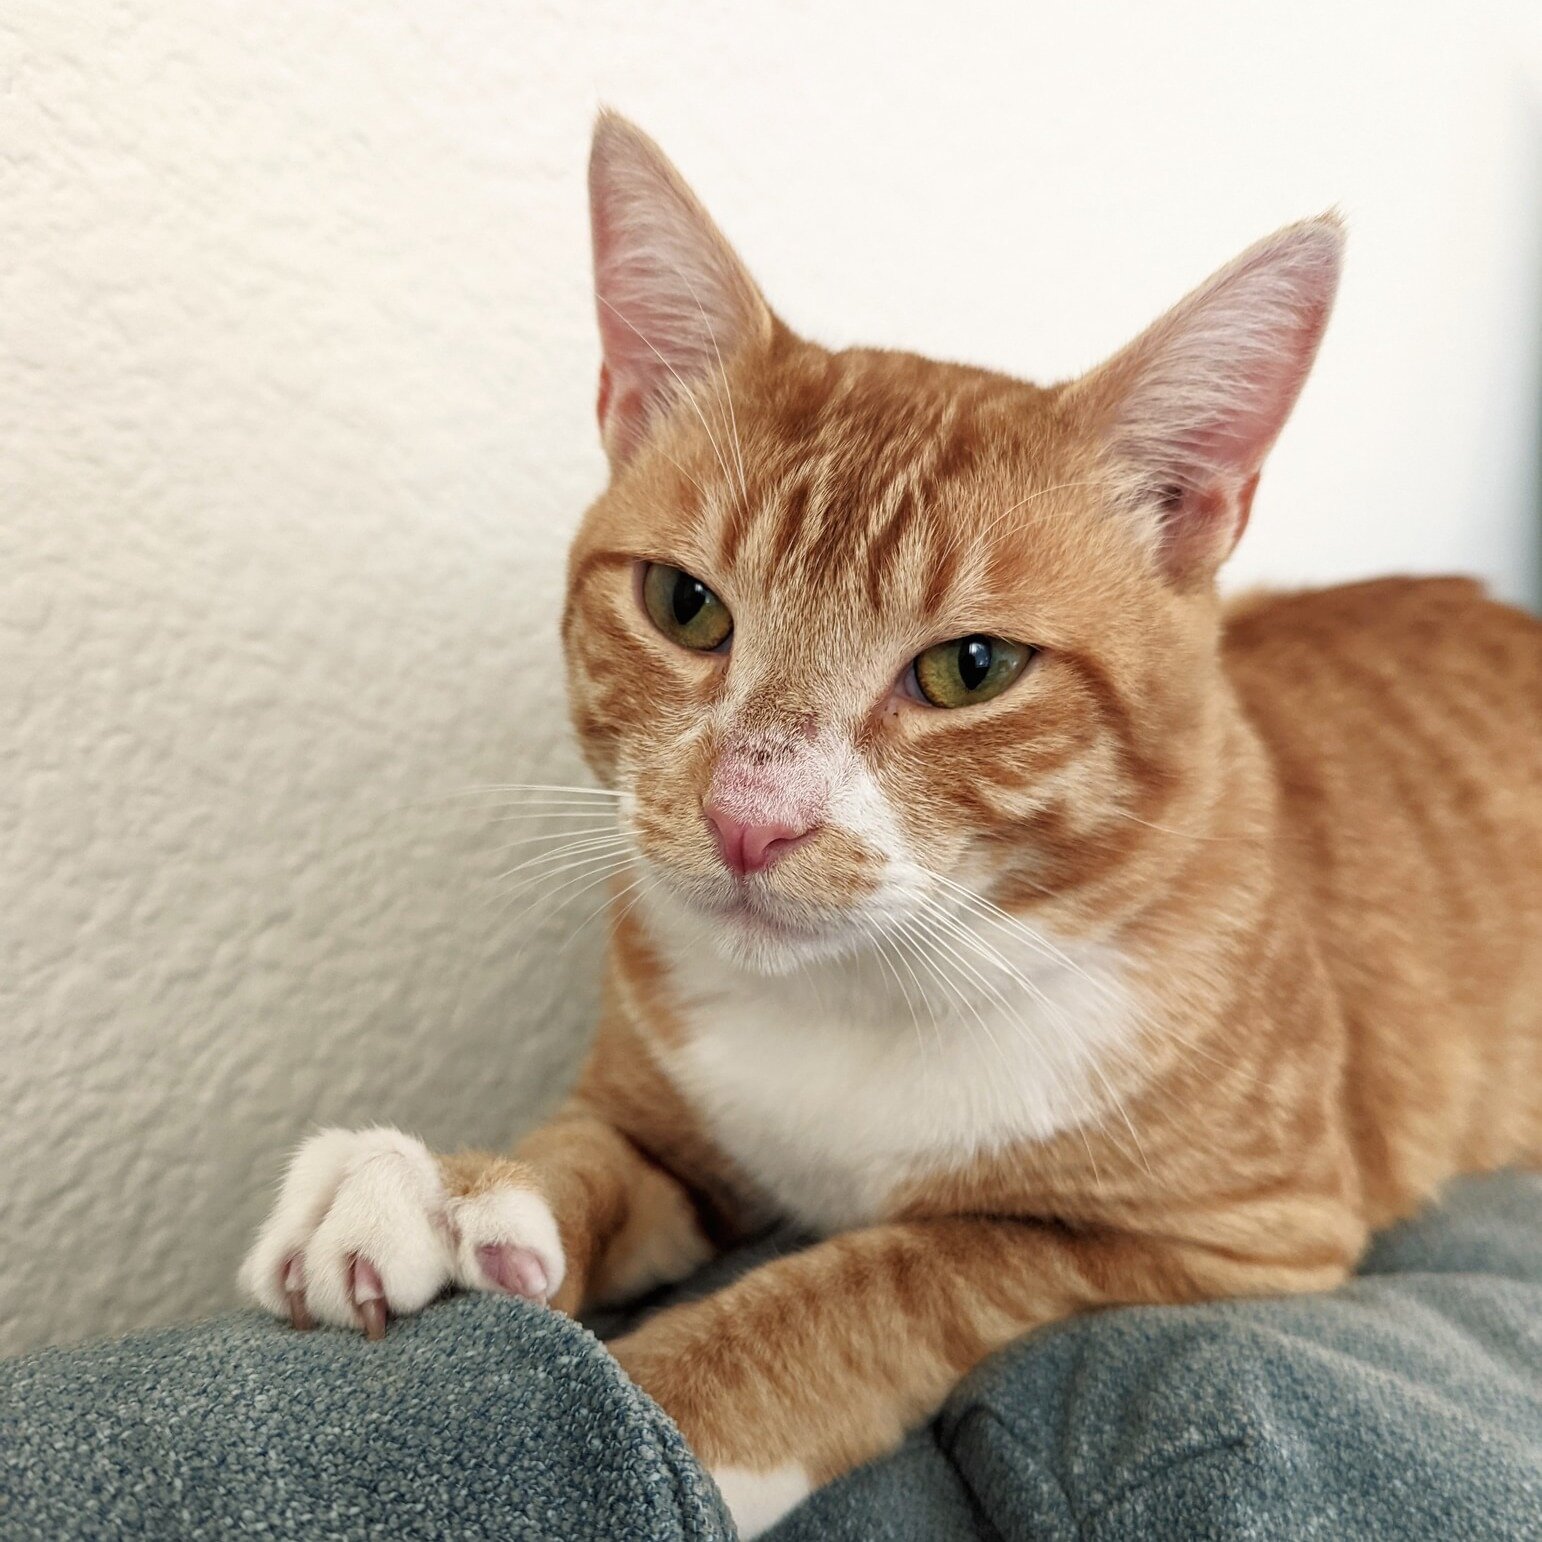 ⚜️Adoption Story⚜️ Midas was a beautiful boy with a heart of gold to match his gorgeous coat. A friendly, confident guy, he enjoyed his time with all the humans that he met. But Midas&rsquo;s story is more than just the story of one cat: Midas&rsquo;